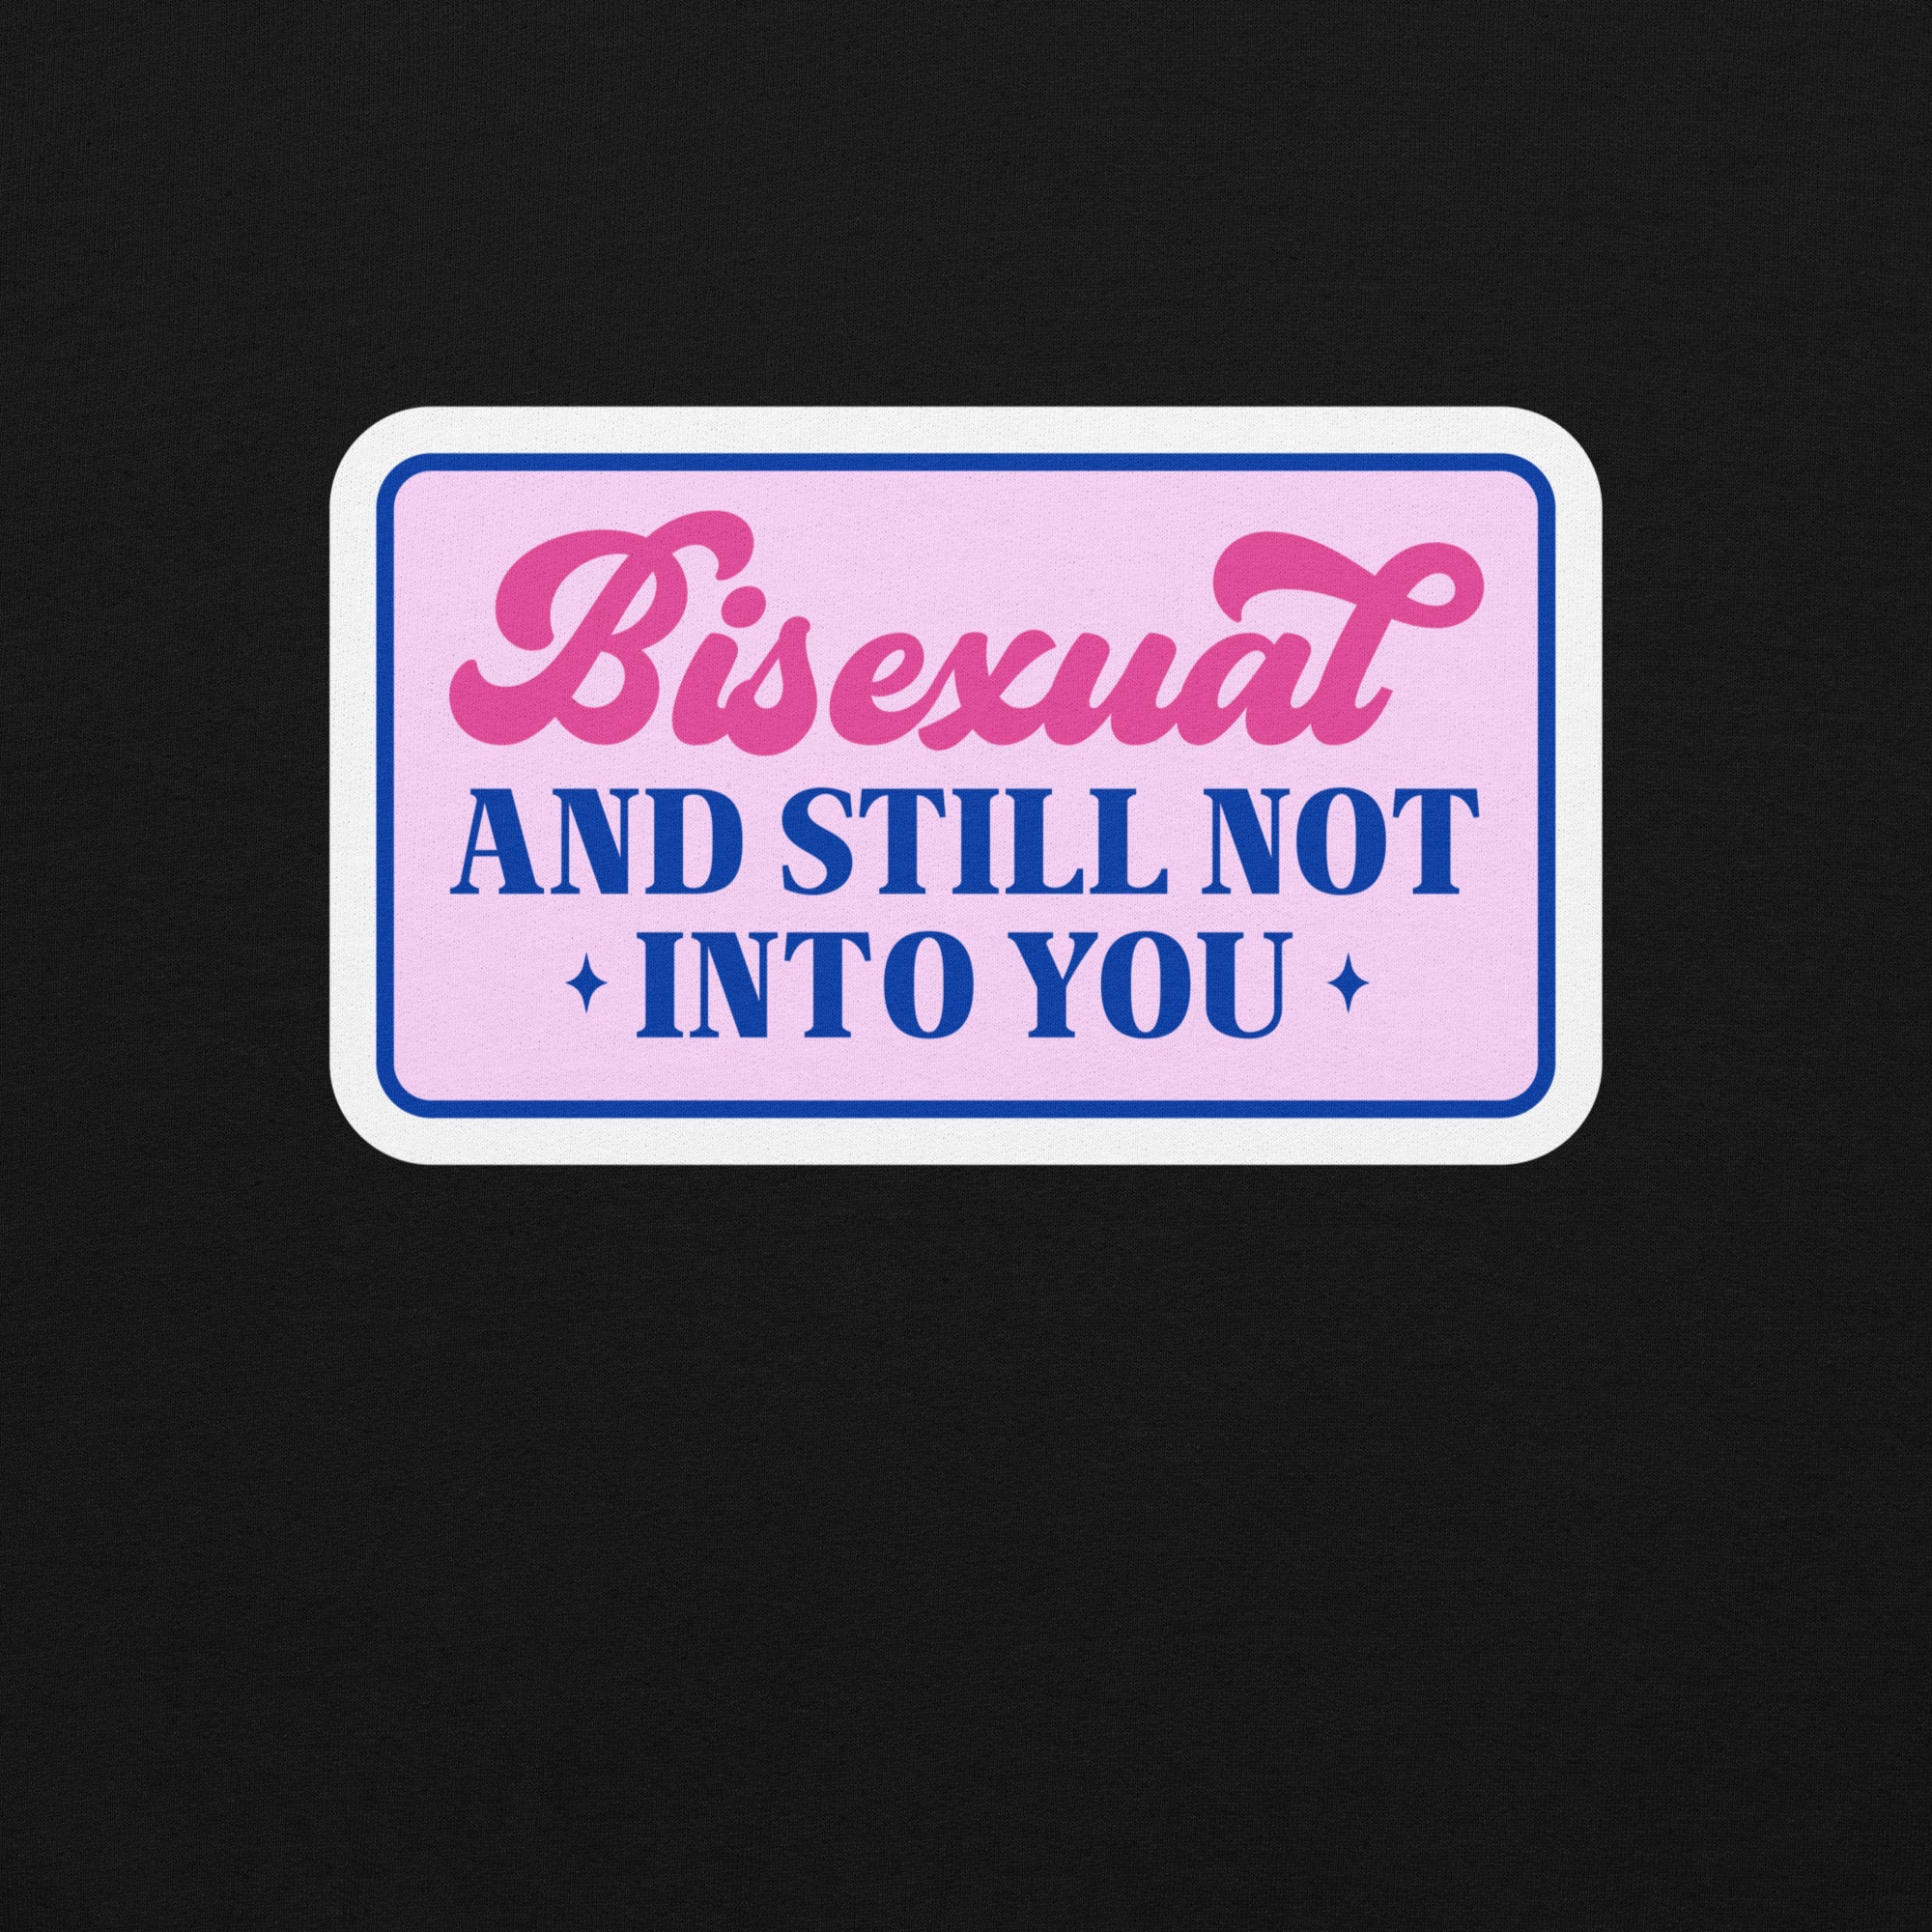 Bisexual AND STILL NOT INTO YOU Unisex Sweat Shirt